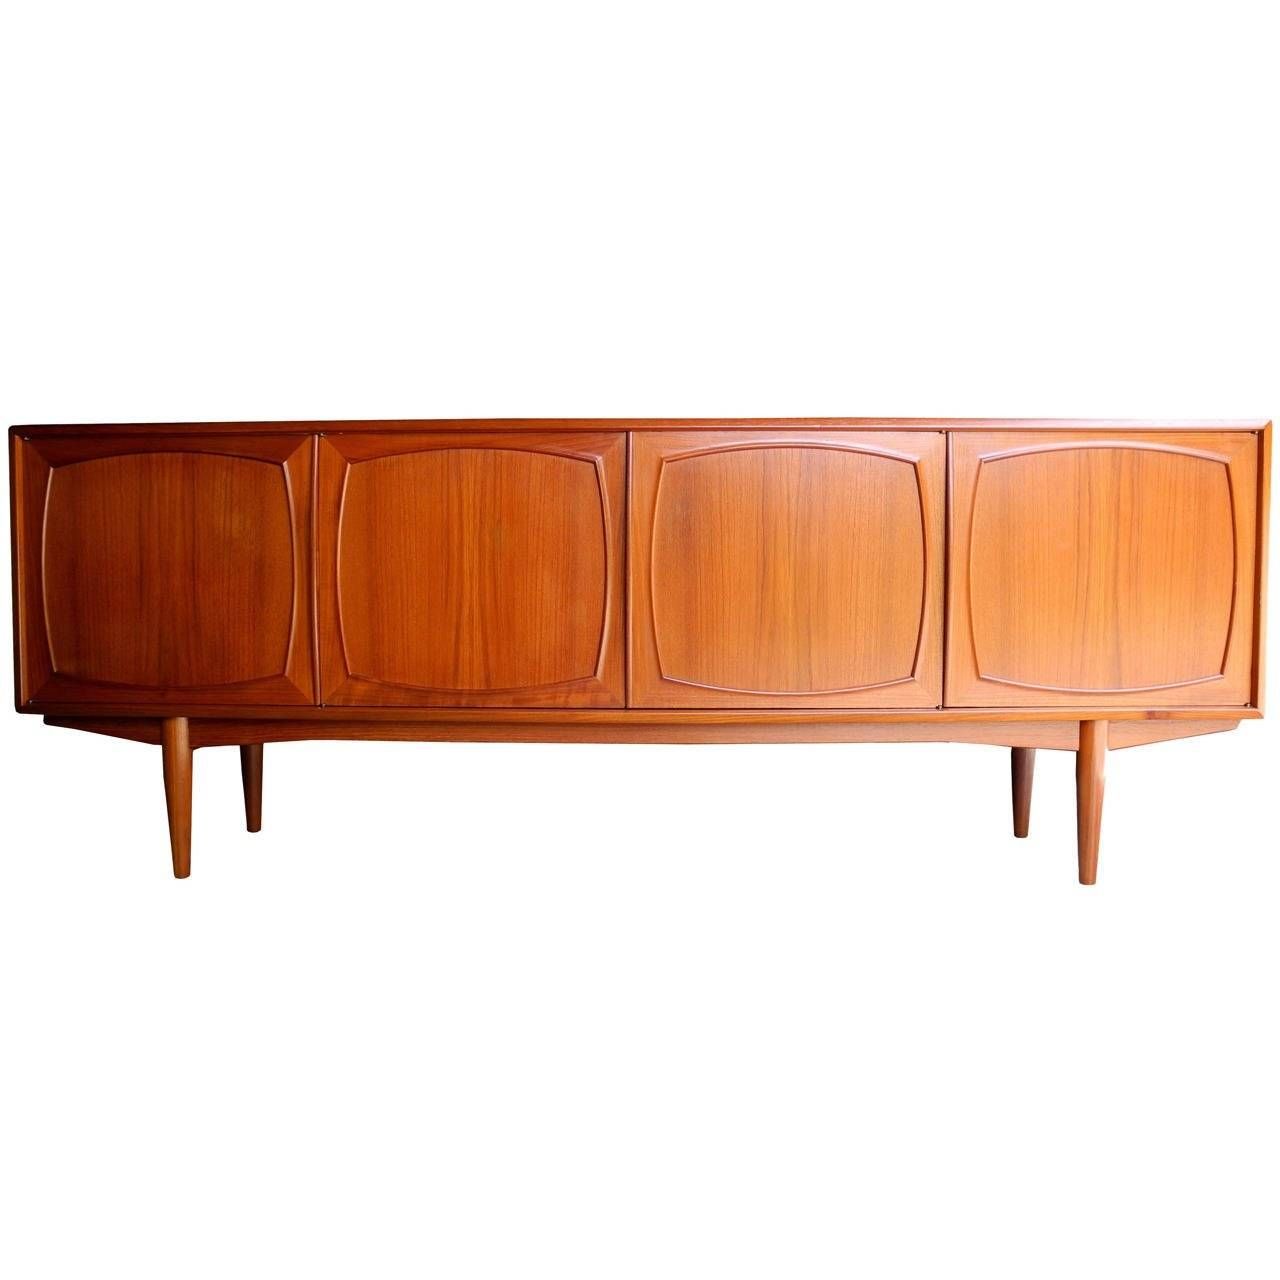 Four Door Danish Modern Teak Sideboard Or Credenzajohannes Within Most Recently Released Credenza Sideboards (View 9 of 15)